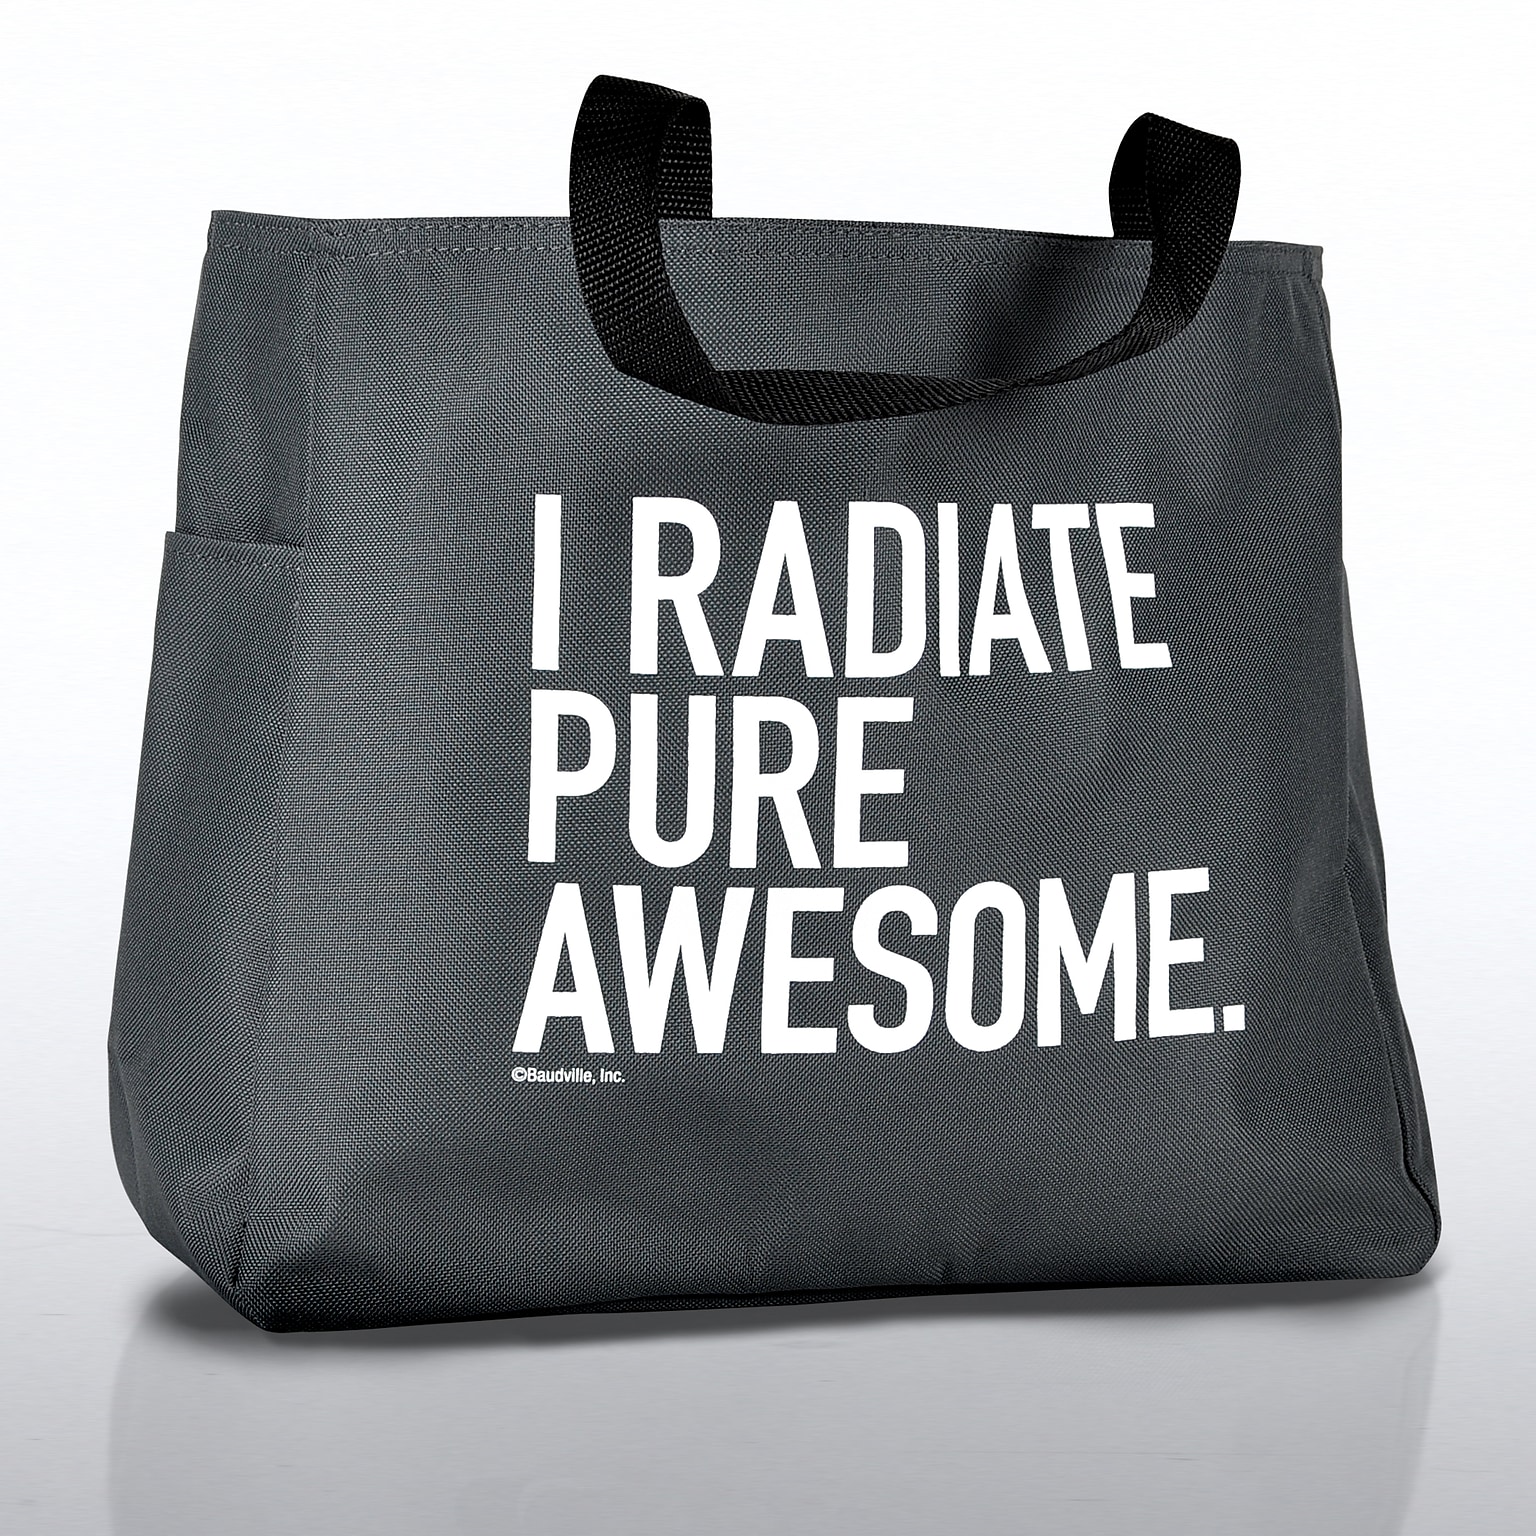 Baudville® Tote Bag, Exclamations - I Radiate Pure Awesome